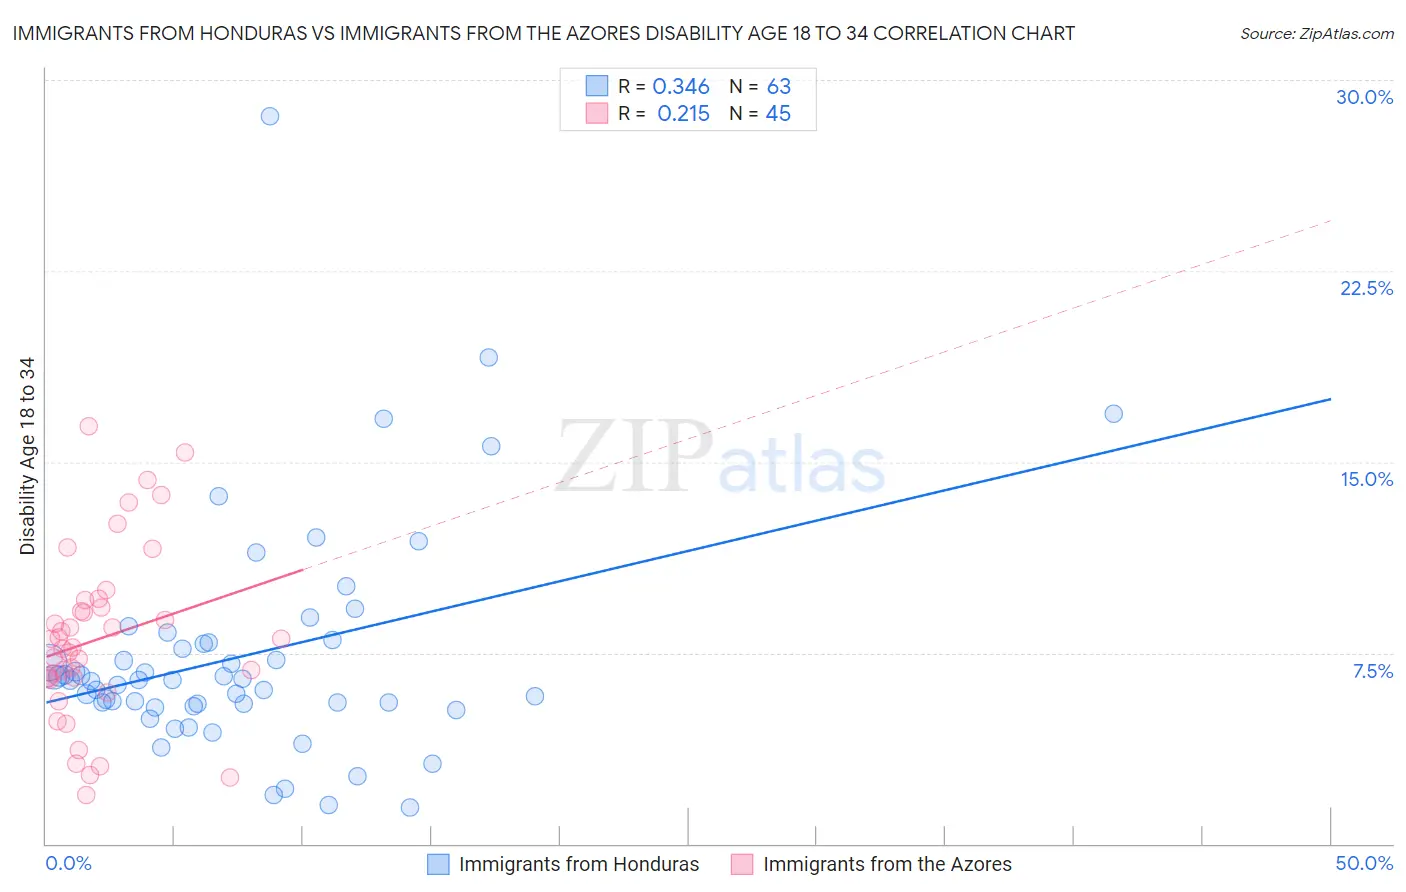 Immigrants from Honduras vs Immigrants from the Azores Disability Age 18 to 34